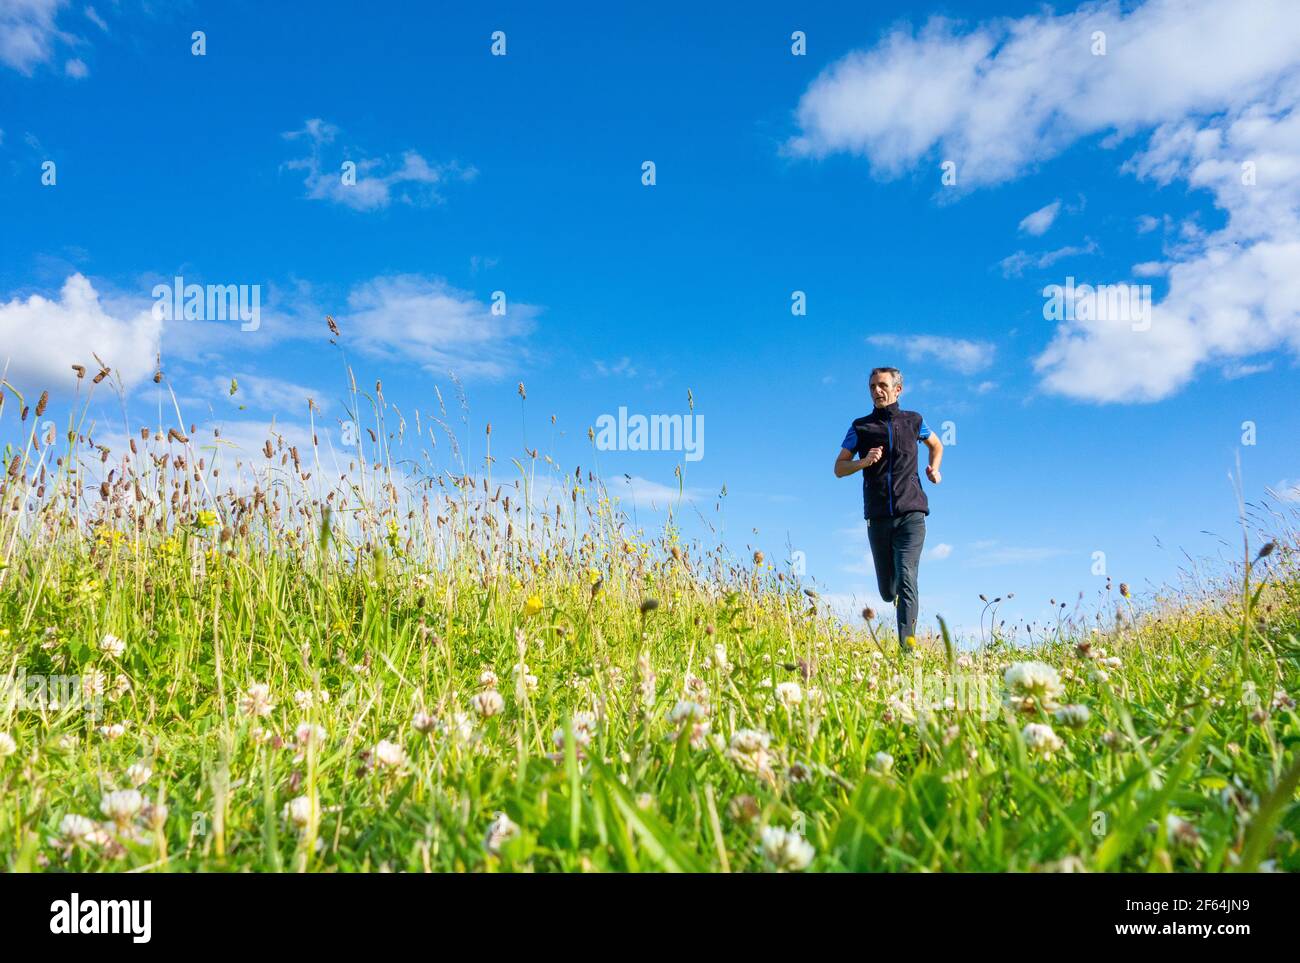 Mature man running, jogging downhill on grass footpath on hill in wildflower meadow, countryside. UK Stock Photo